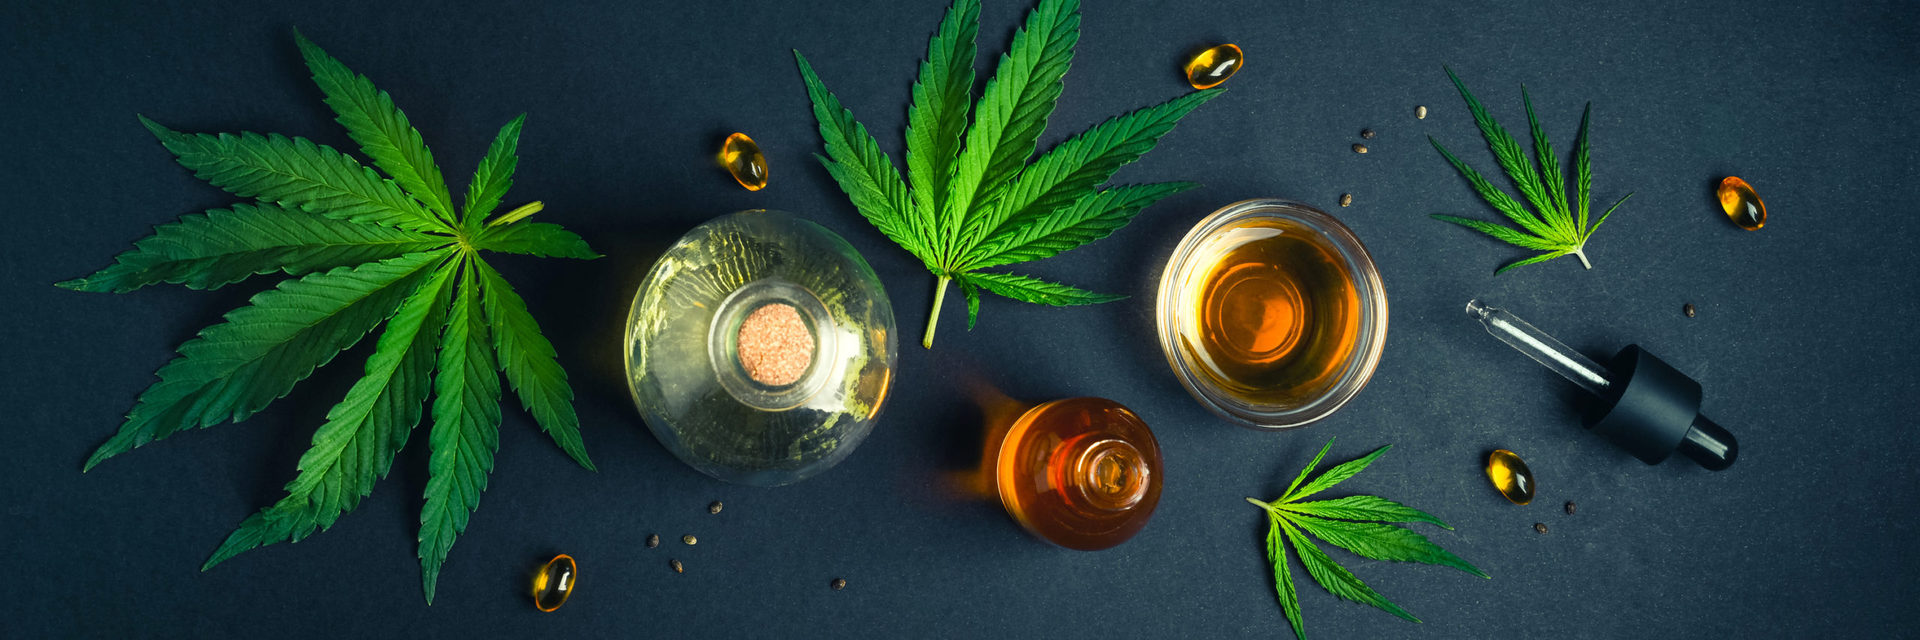 Medical CBD oil on black trendy background with cannabis leaves.